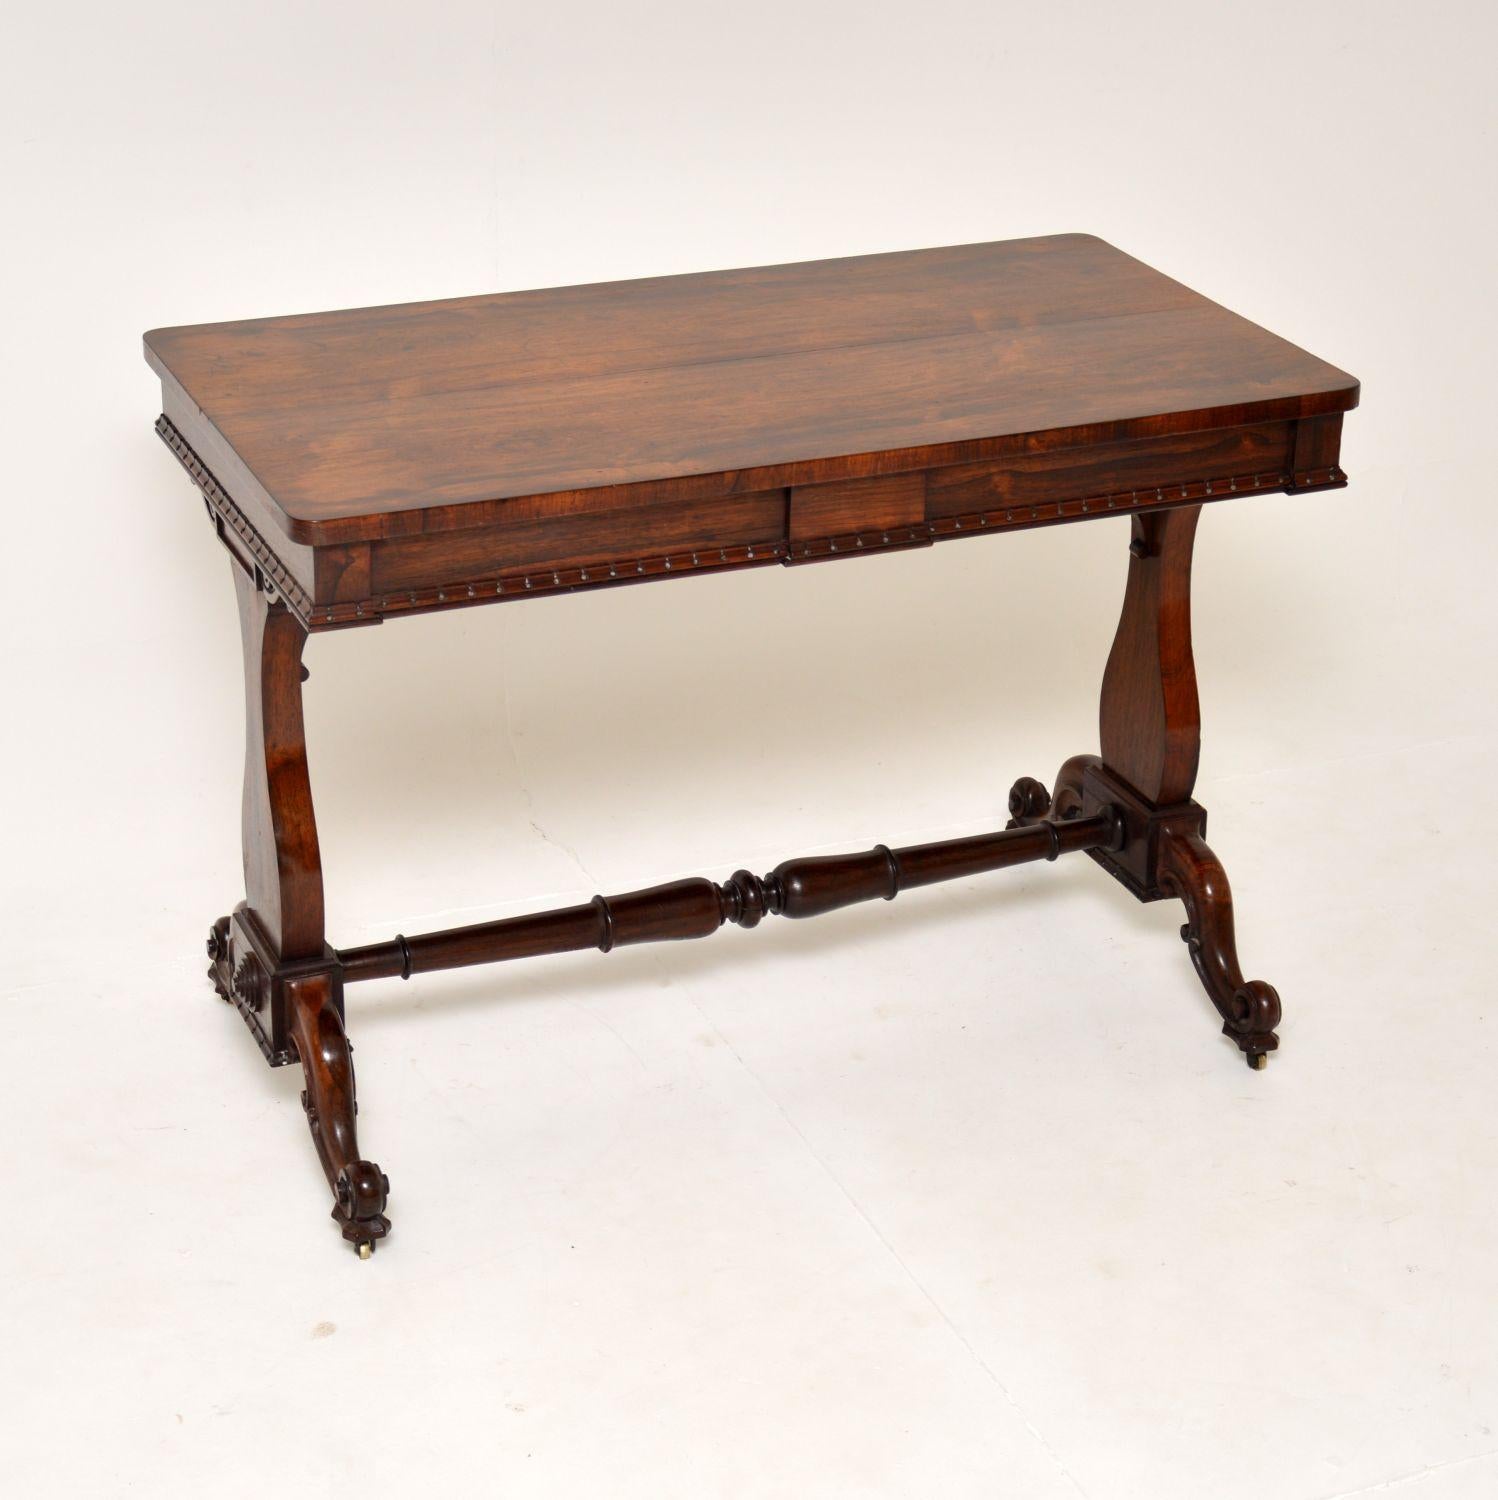 A fantastic original antique William IV wood writing table / desk of the highest order. This was made in England it dates from around 1830-1840.

It is a lovely size, fairly small and compact yet with plenty of workspace. There is beautiful